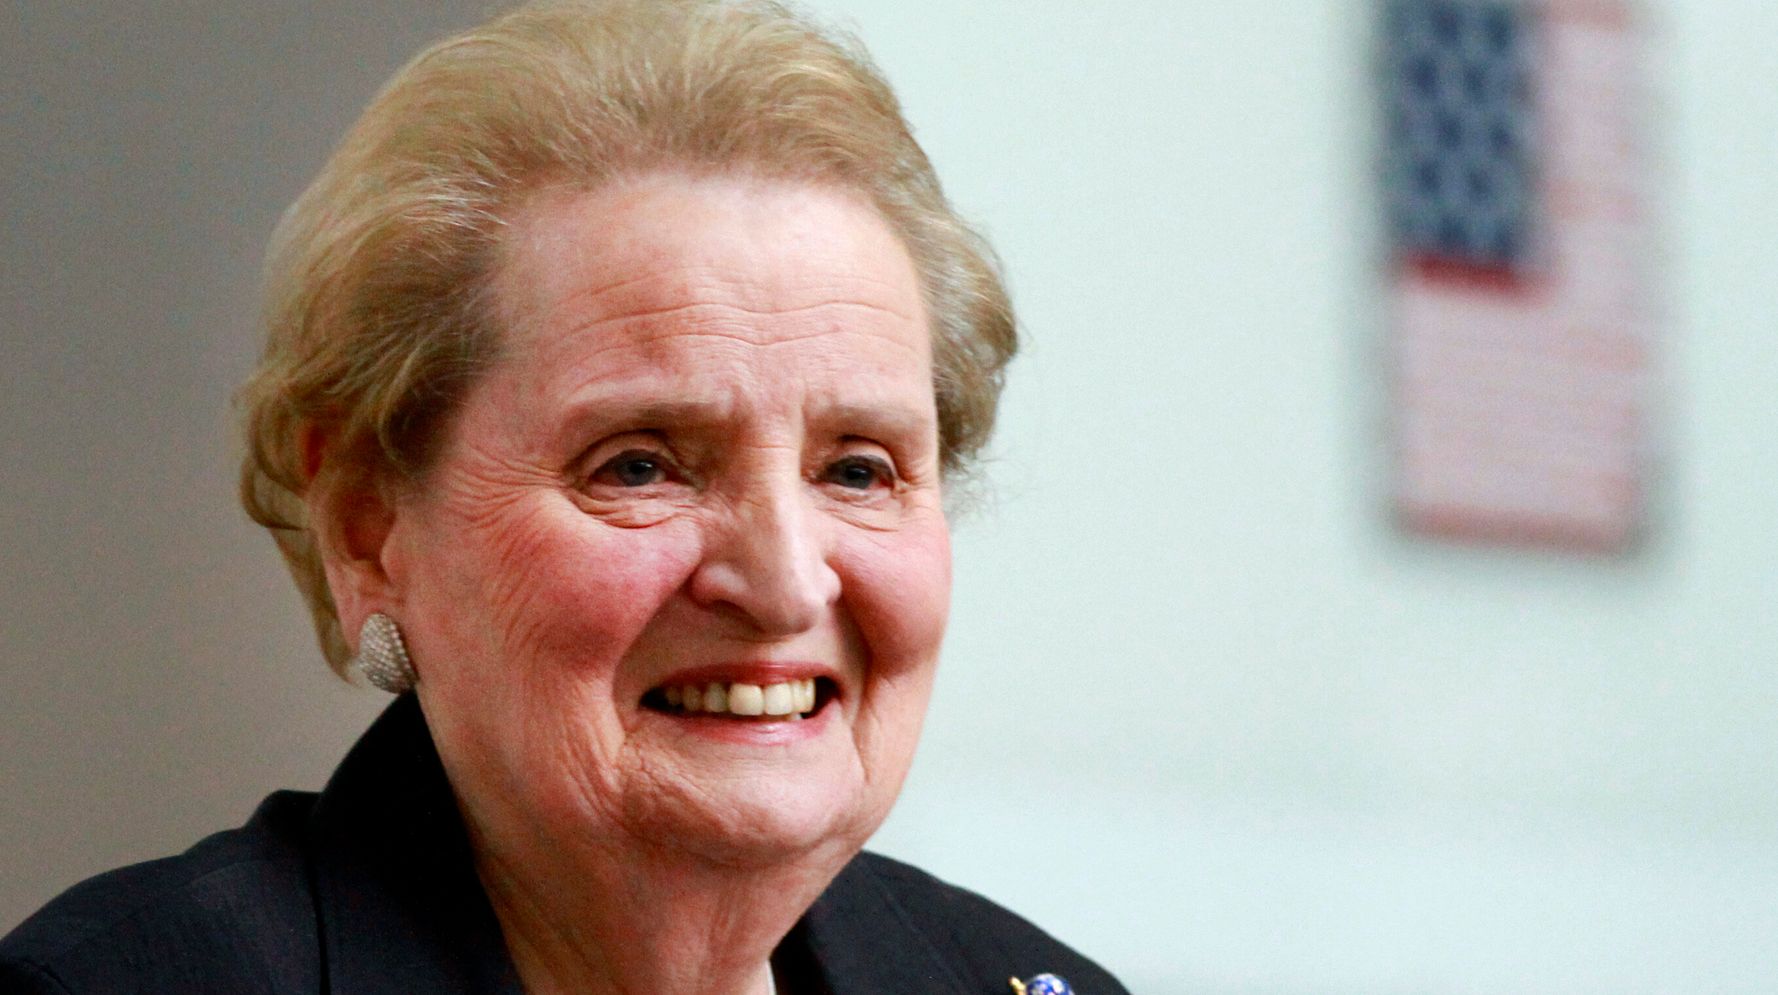 World Leaders, DC Elite To Pay Tribute To Madeleine Albright